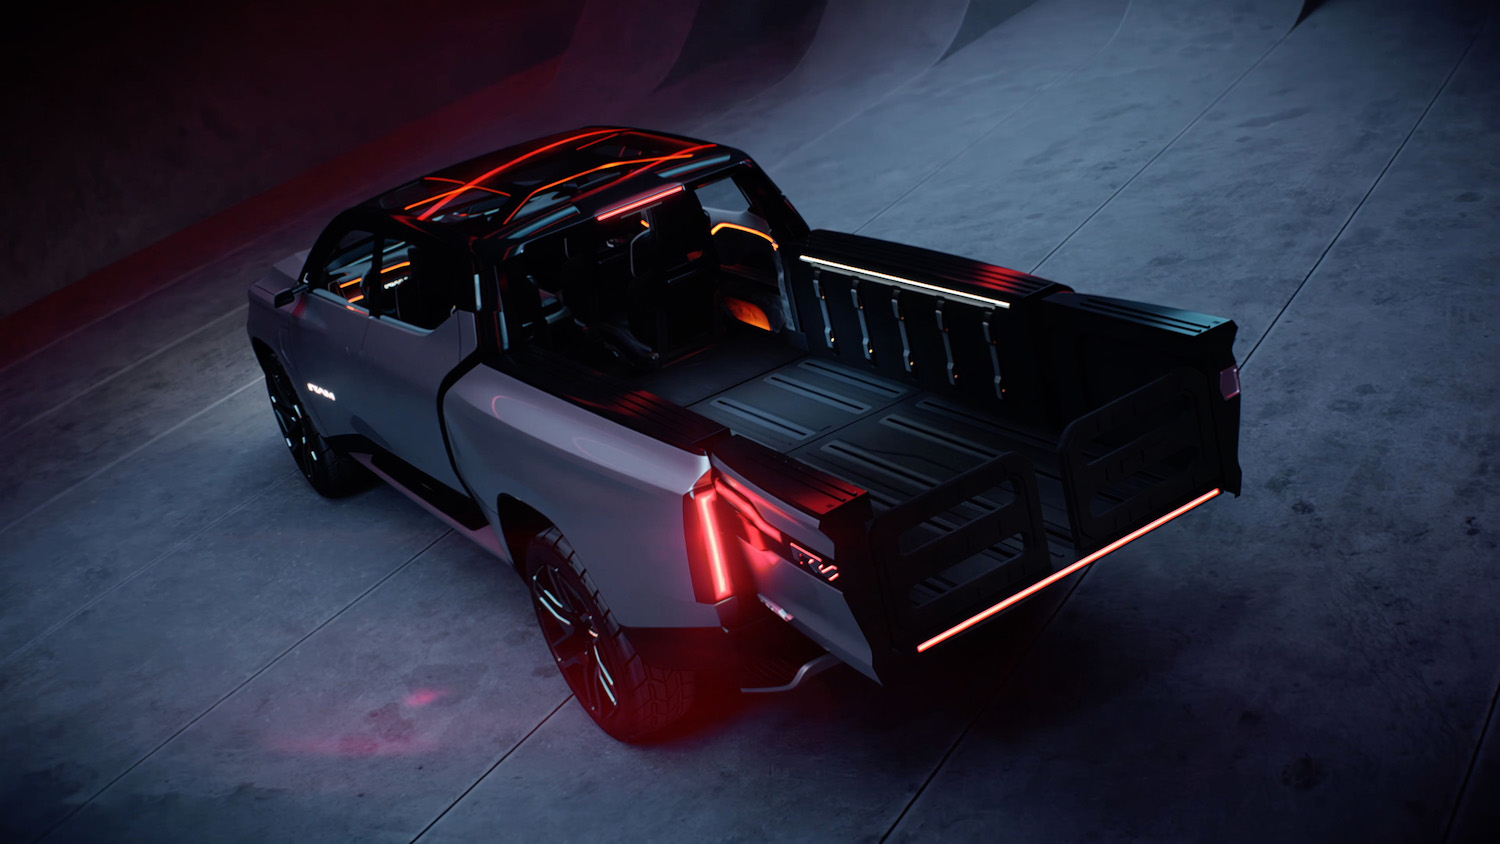 The bed and rear seats of the Ram Revolution electric truck concept.